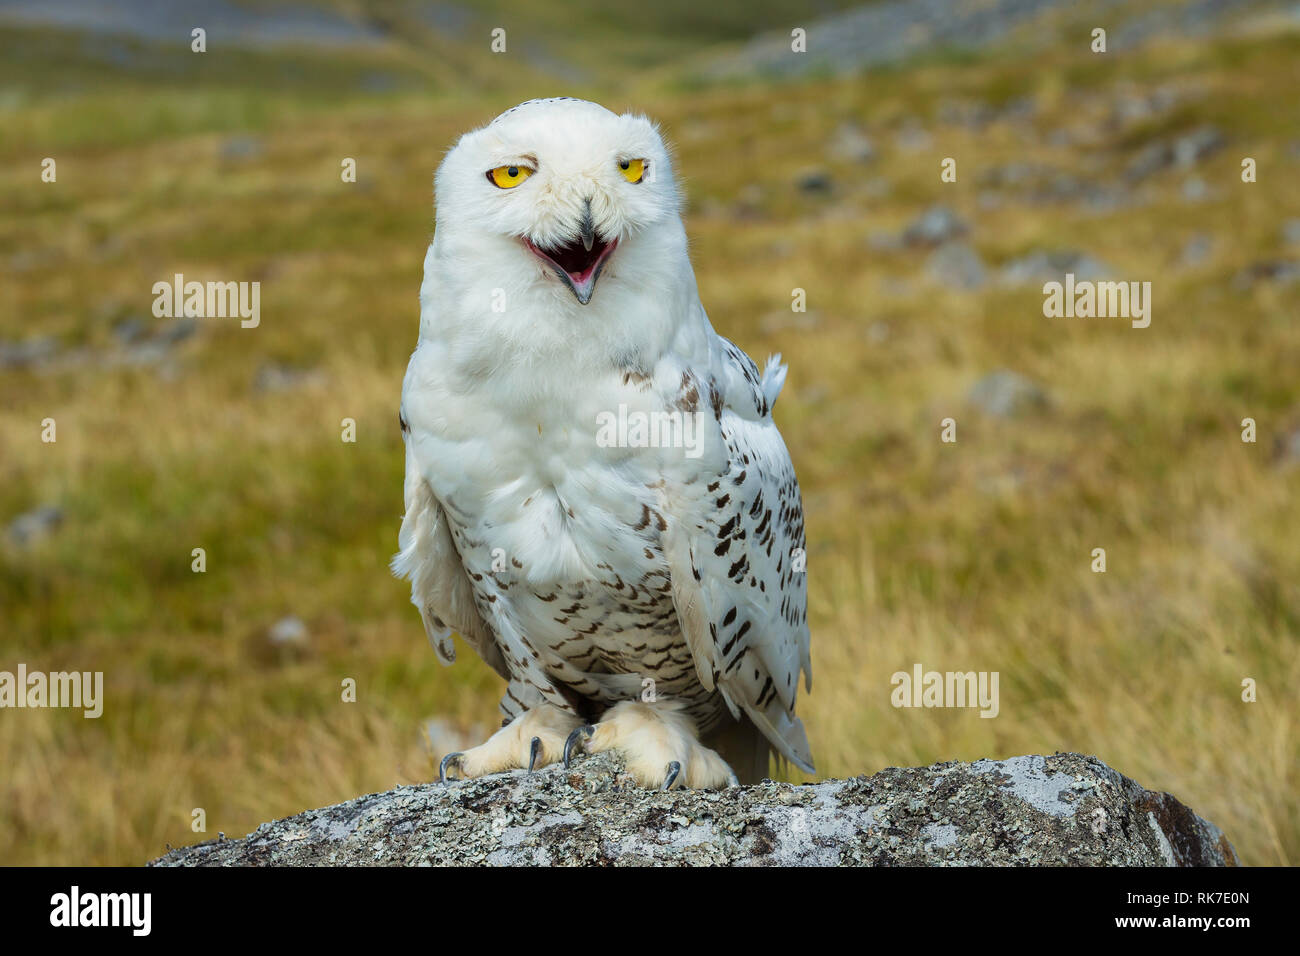 Snowy owl laughing with very happy, comical face. Large white owl with bright amber eyes. Scientific name: Scandiacus bubo on lichen covered rock Stock Photo